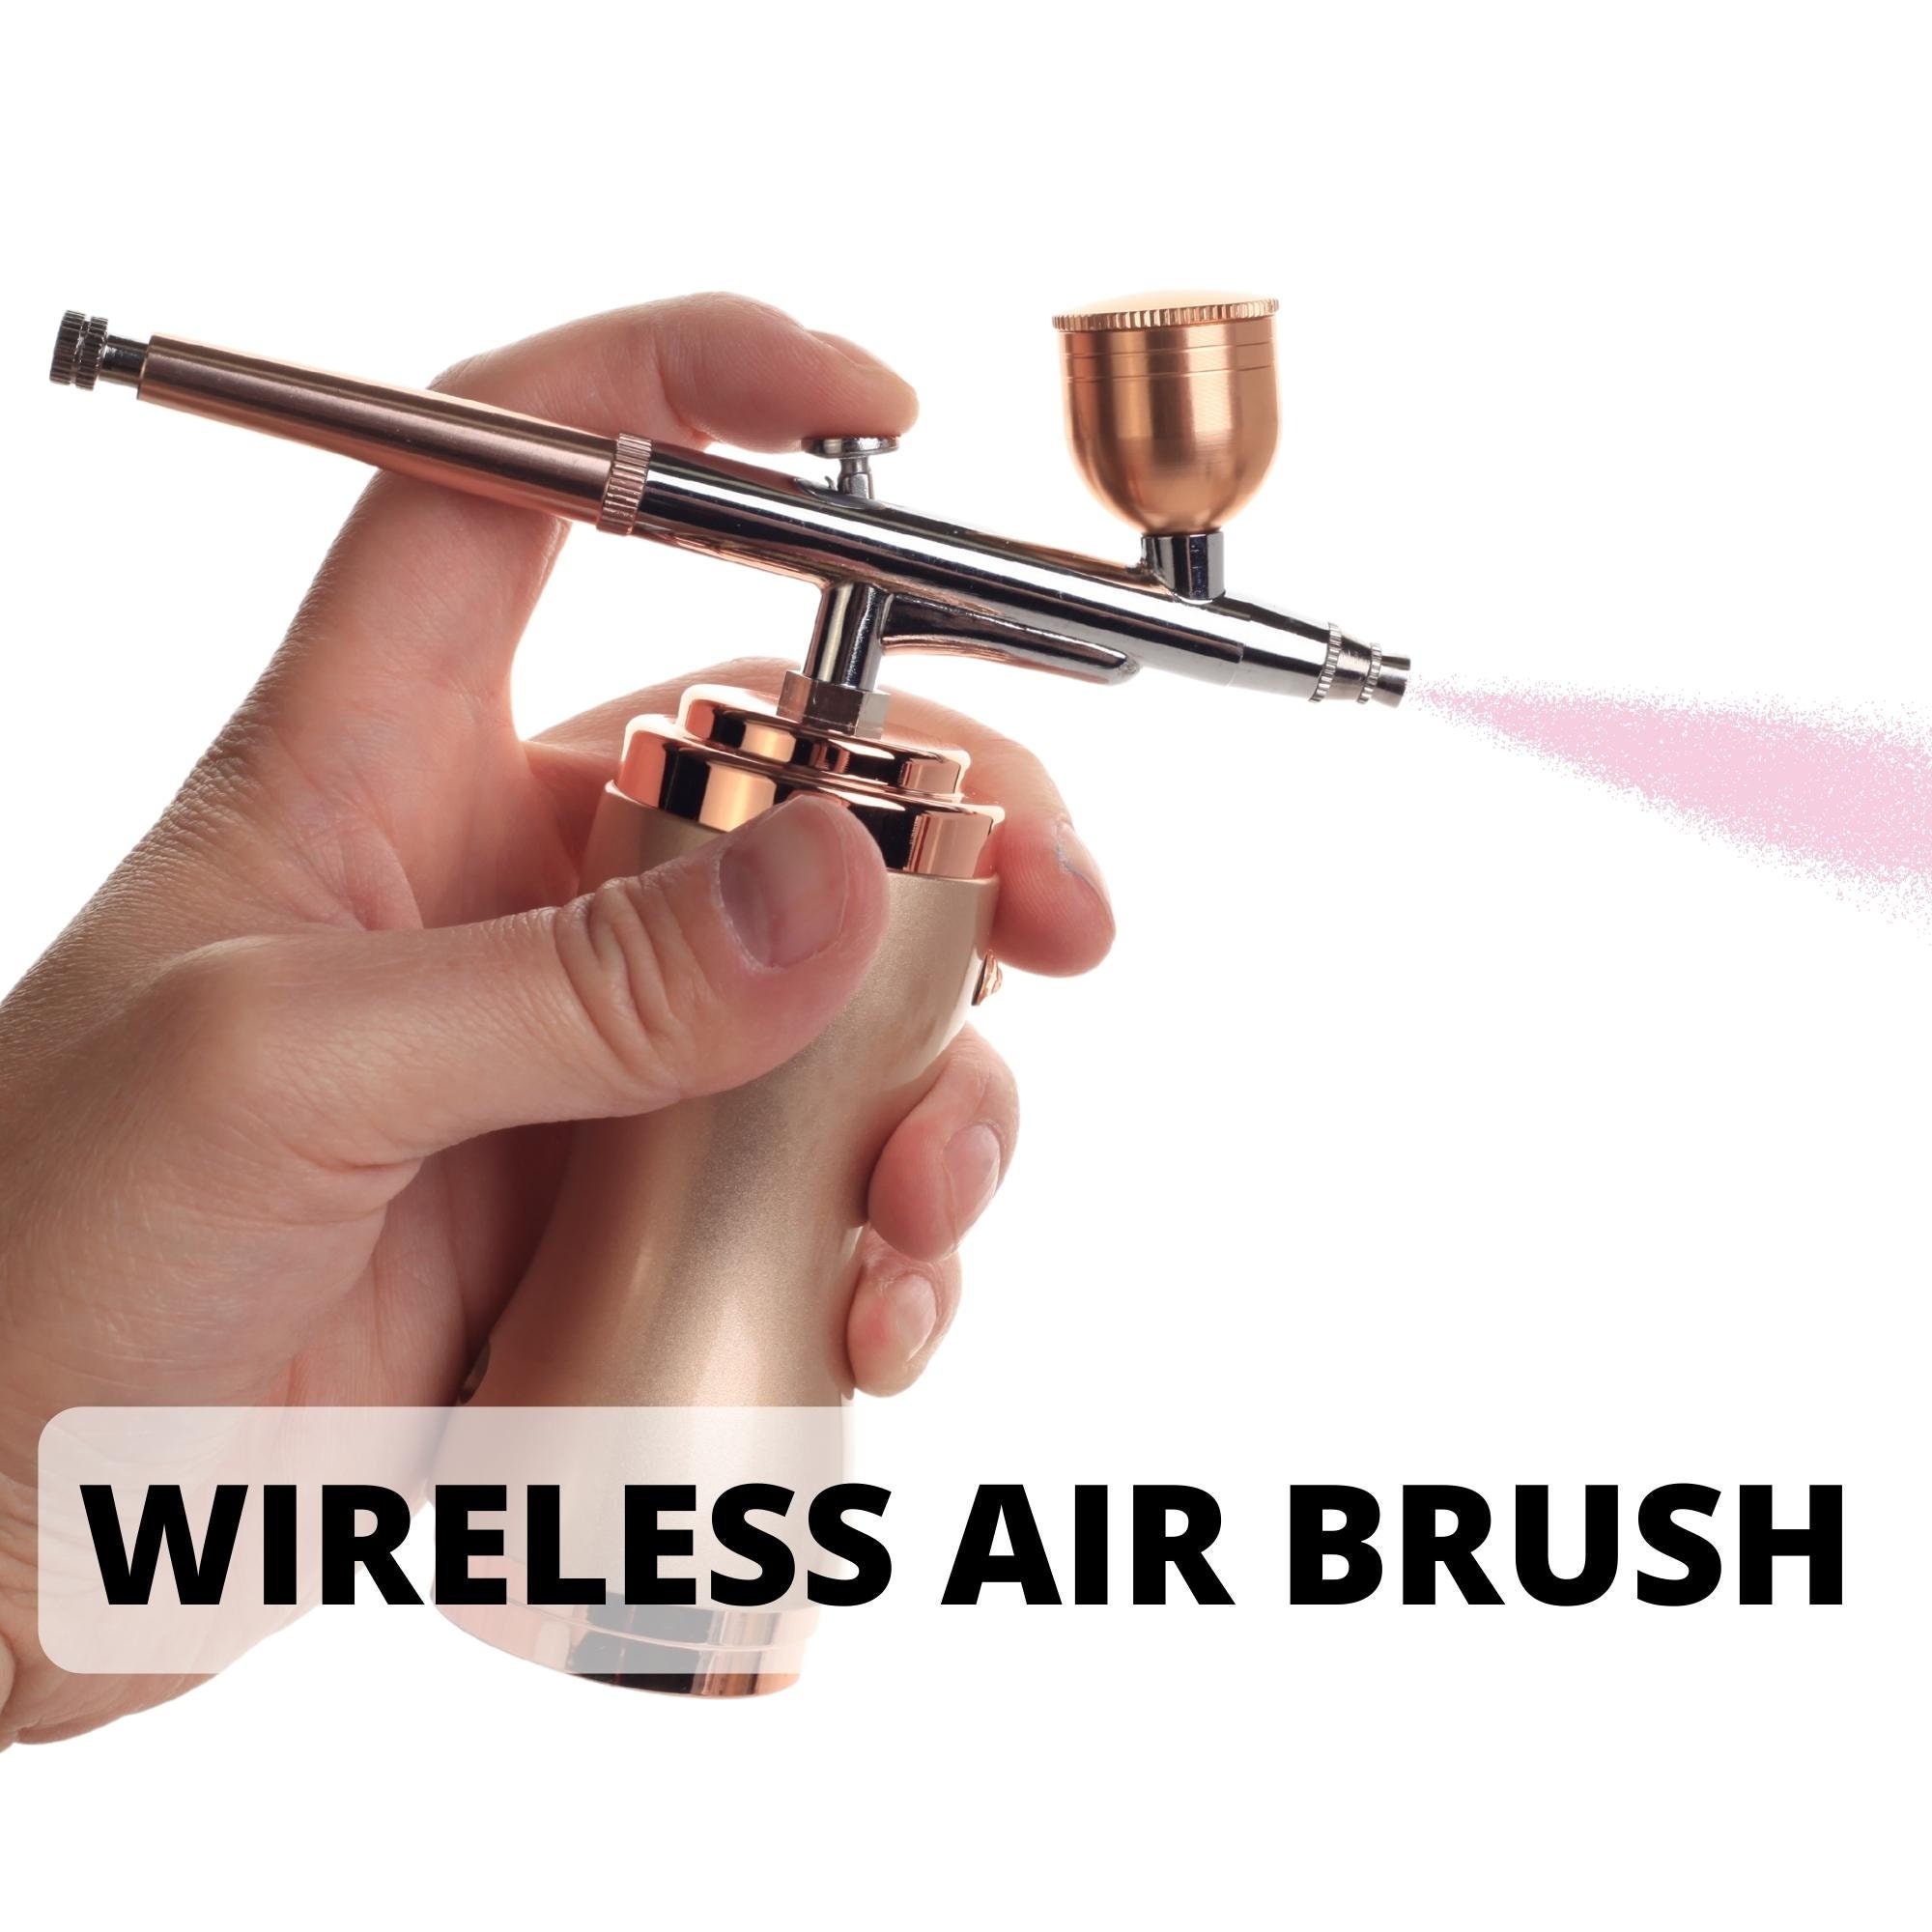  Airbrush Rechargeable Cordless Airbrush-Kit Compressor - 30PSI  High Pressure Airbrush Gun with Hose Wireless Air Brush for Model Painting, Makeup,Barber, Nail Art, Cake Decor : Arts, Crafts & Sewing